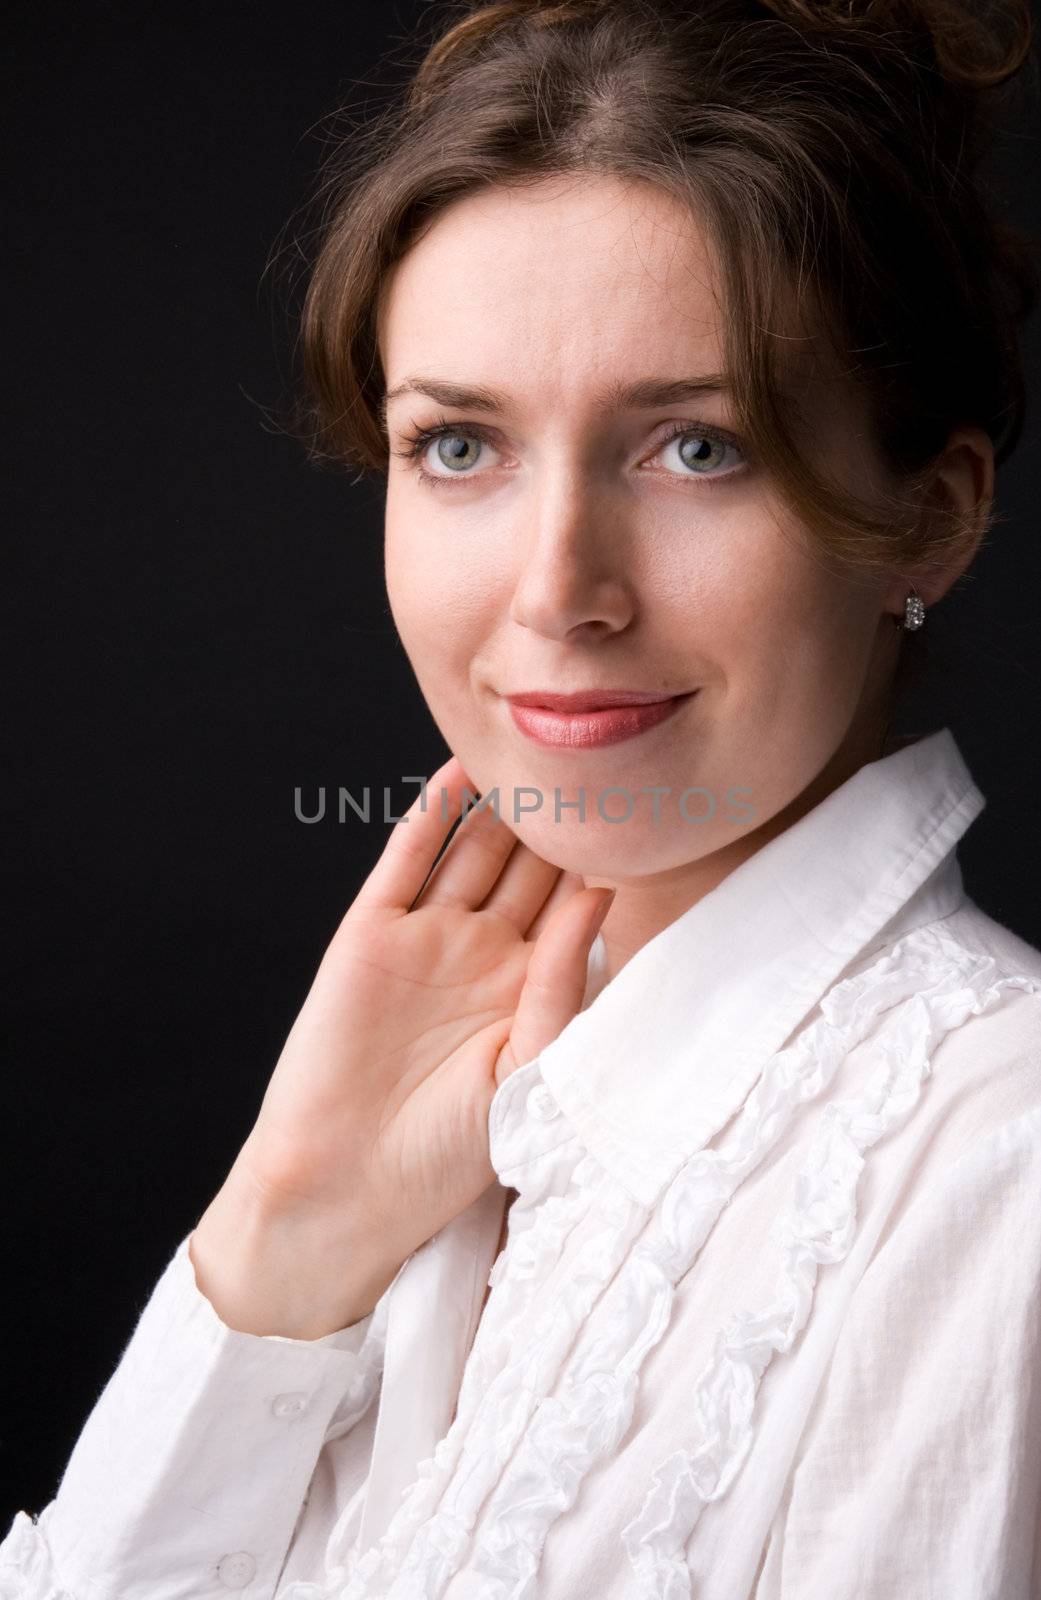 The beautiful girl in studio on a black background.